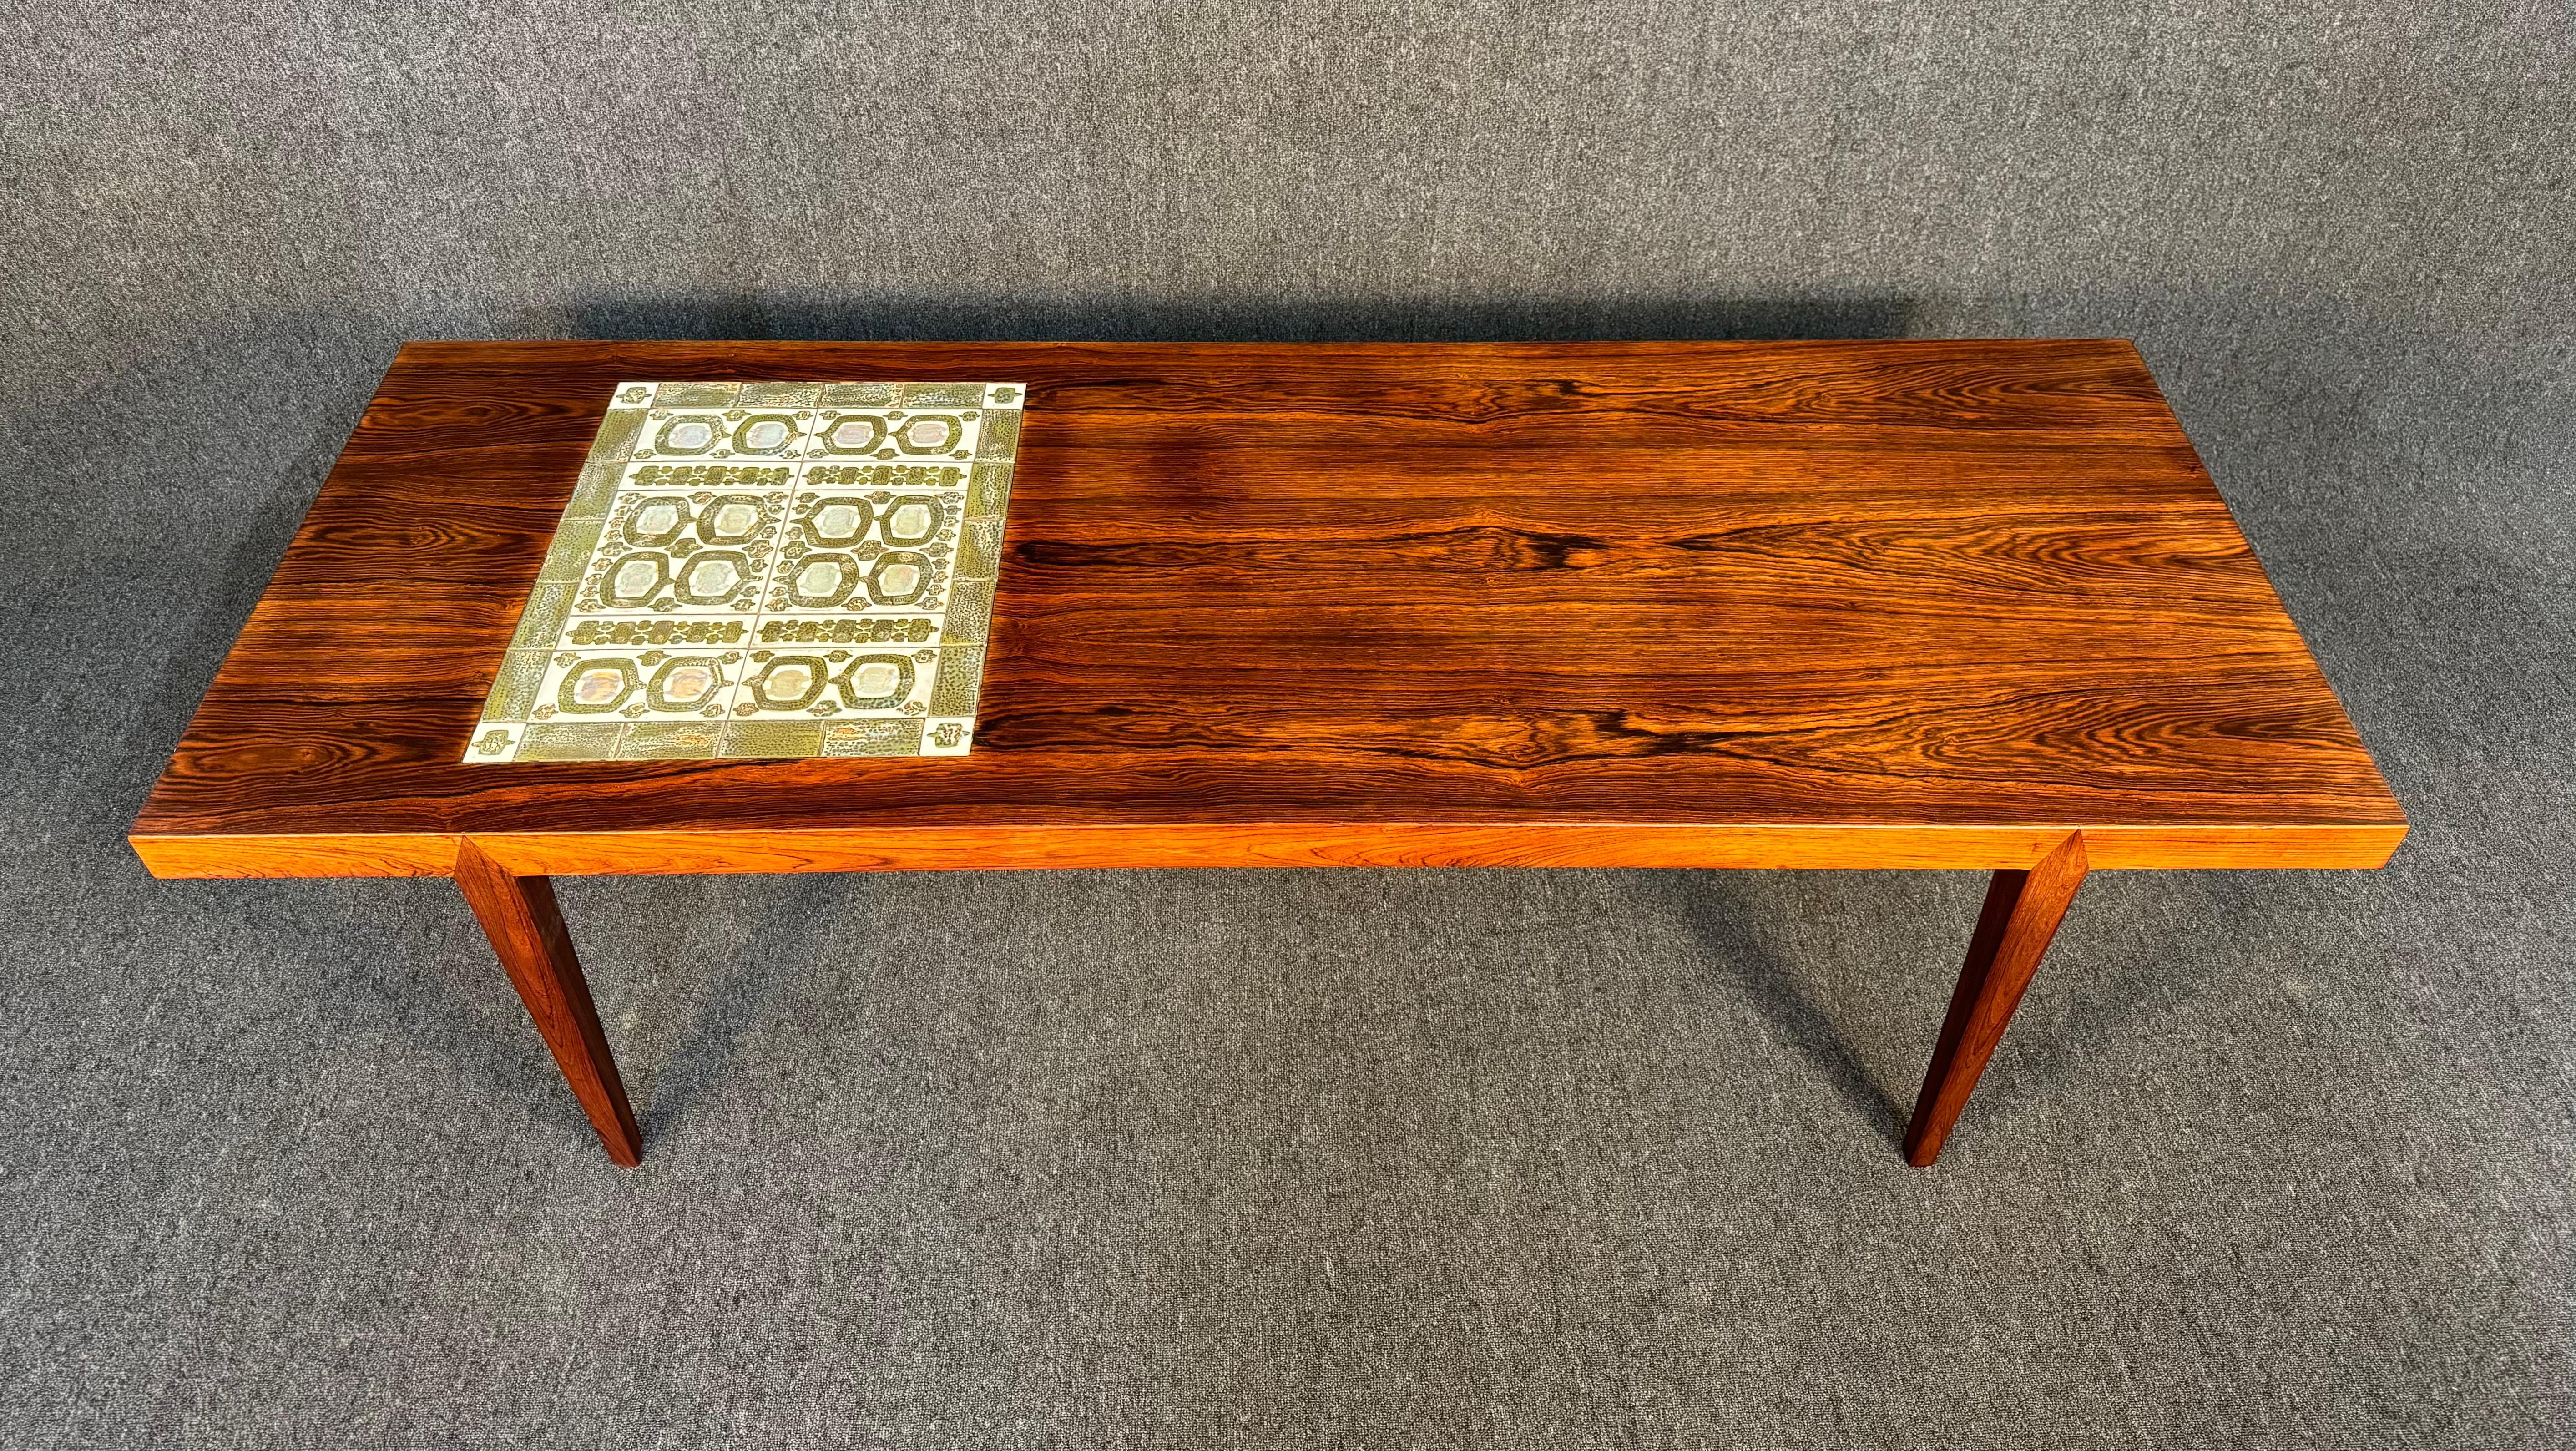 Vintage Danish MidCentury Modern Rosewood Coffee Table & Tiles by Severin Hansen In Good Condition For Sale In San Marcos, CA